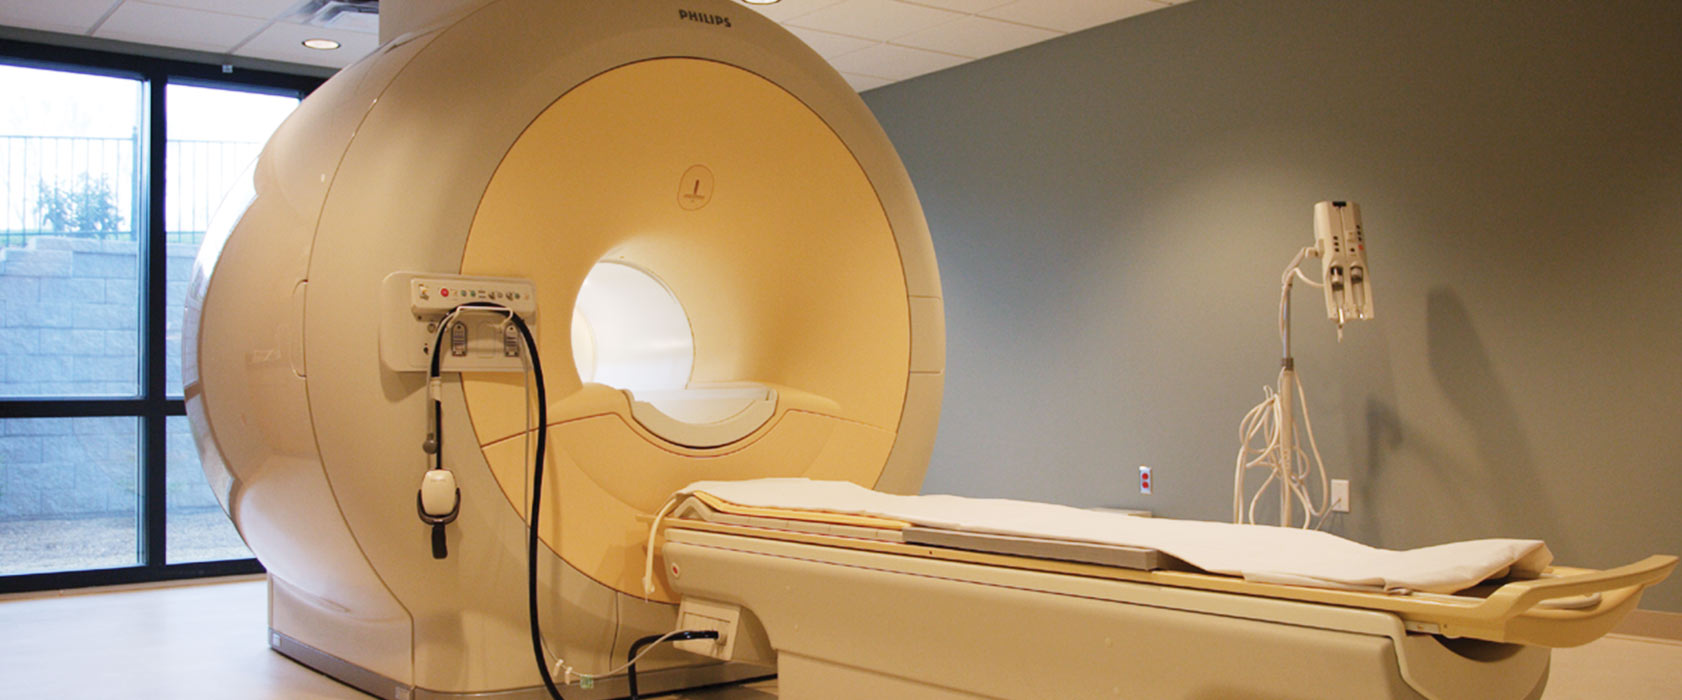 Outpatient Ct Scan Near Me ct scan machine